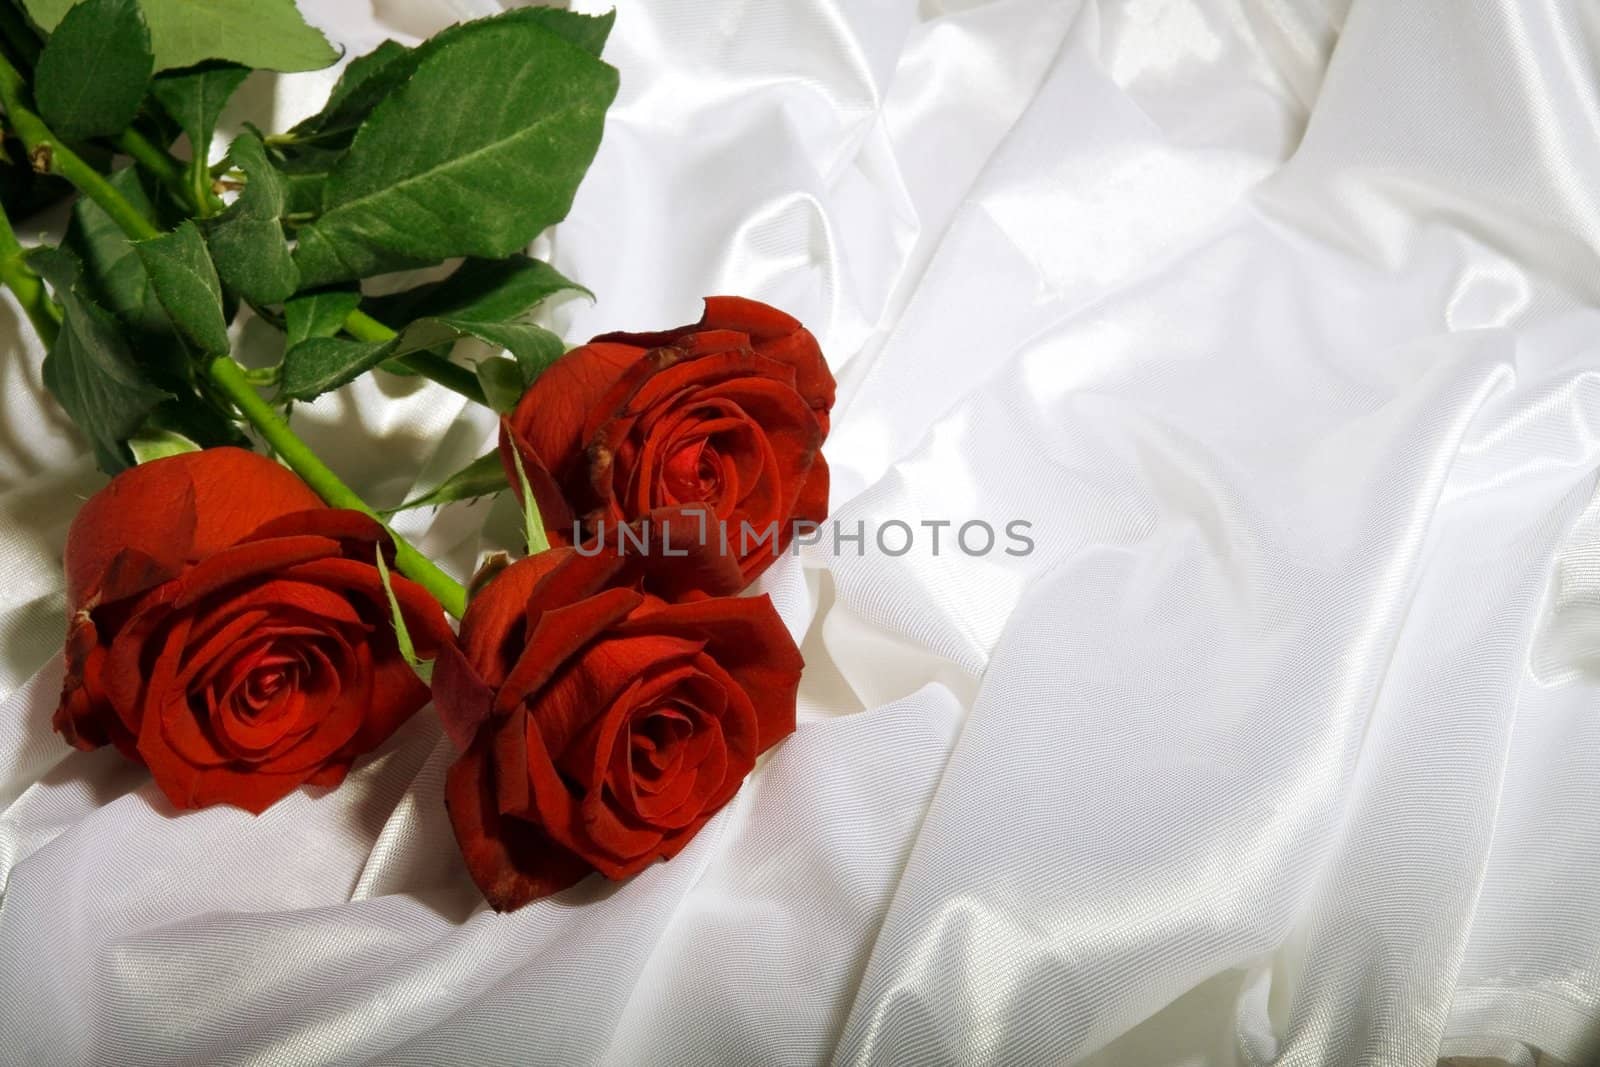 Red roses with green leaves among the folds of a white textured textile